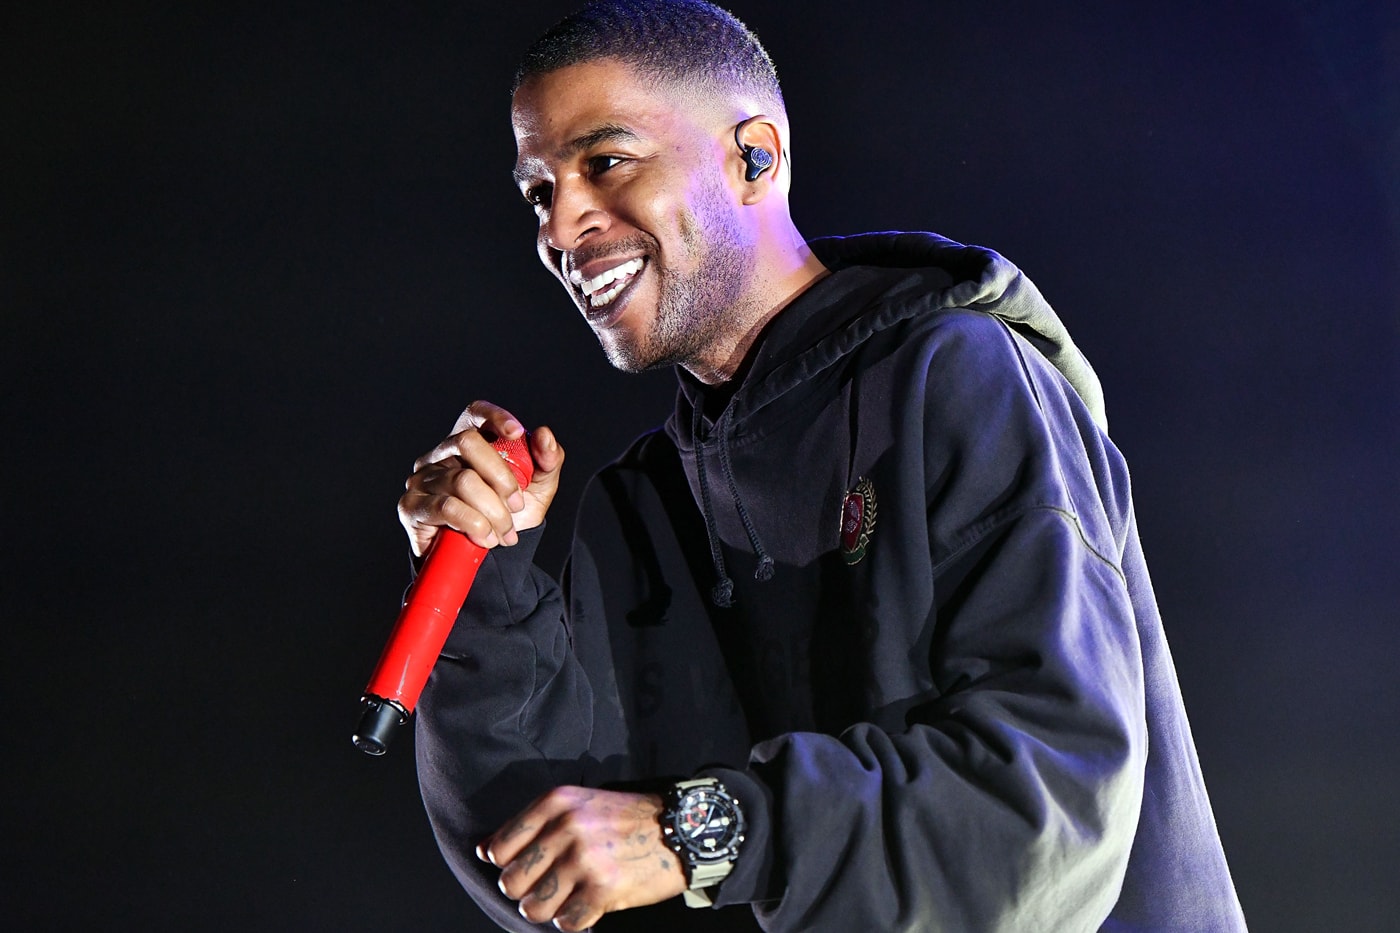 KiD CuDi featuring Kanye West – Wylin’ Cause I’m Young